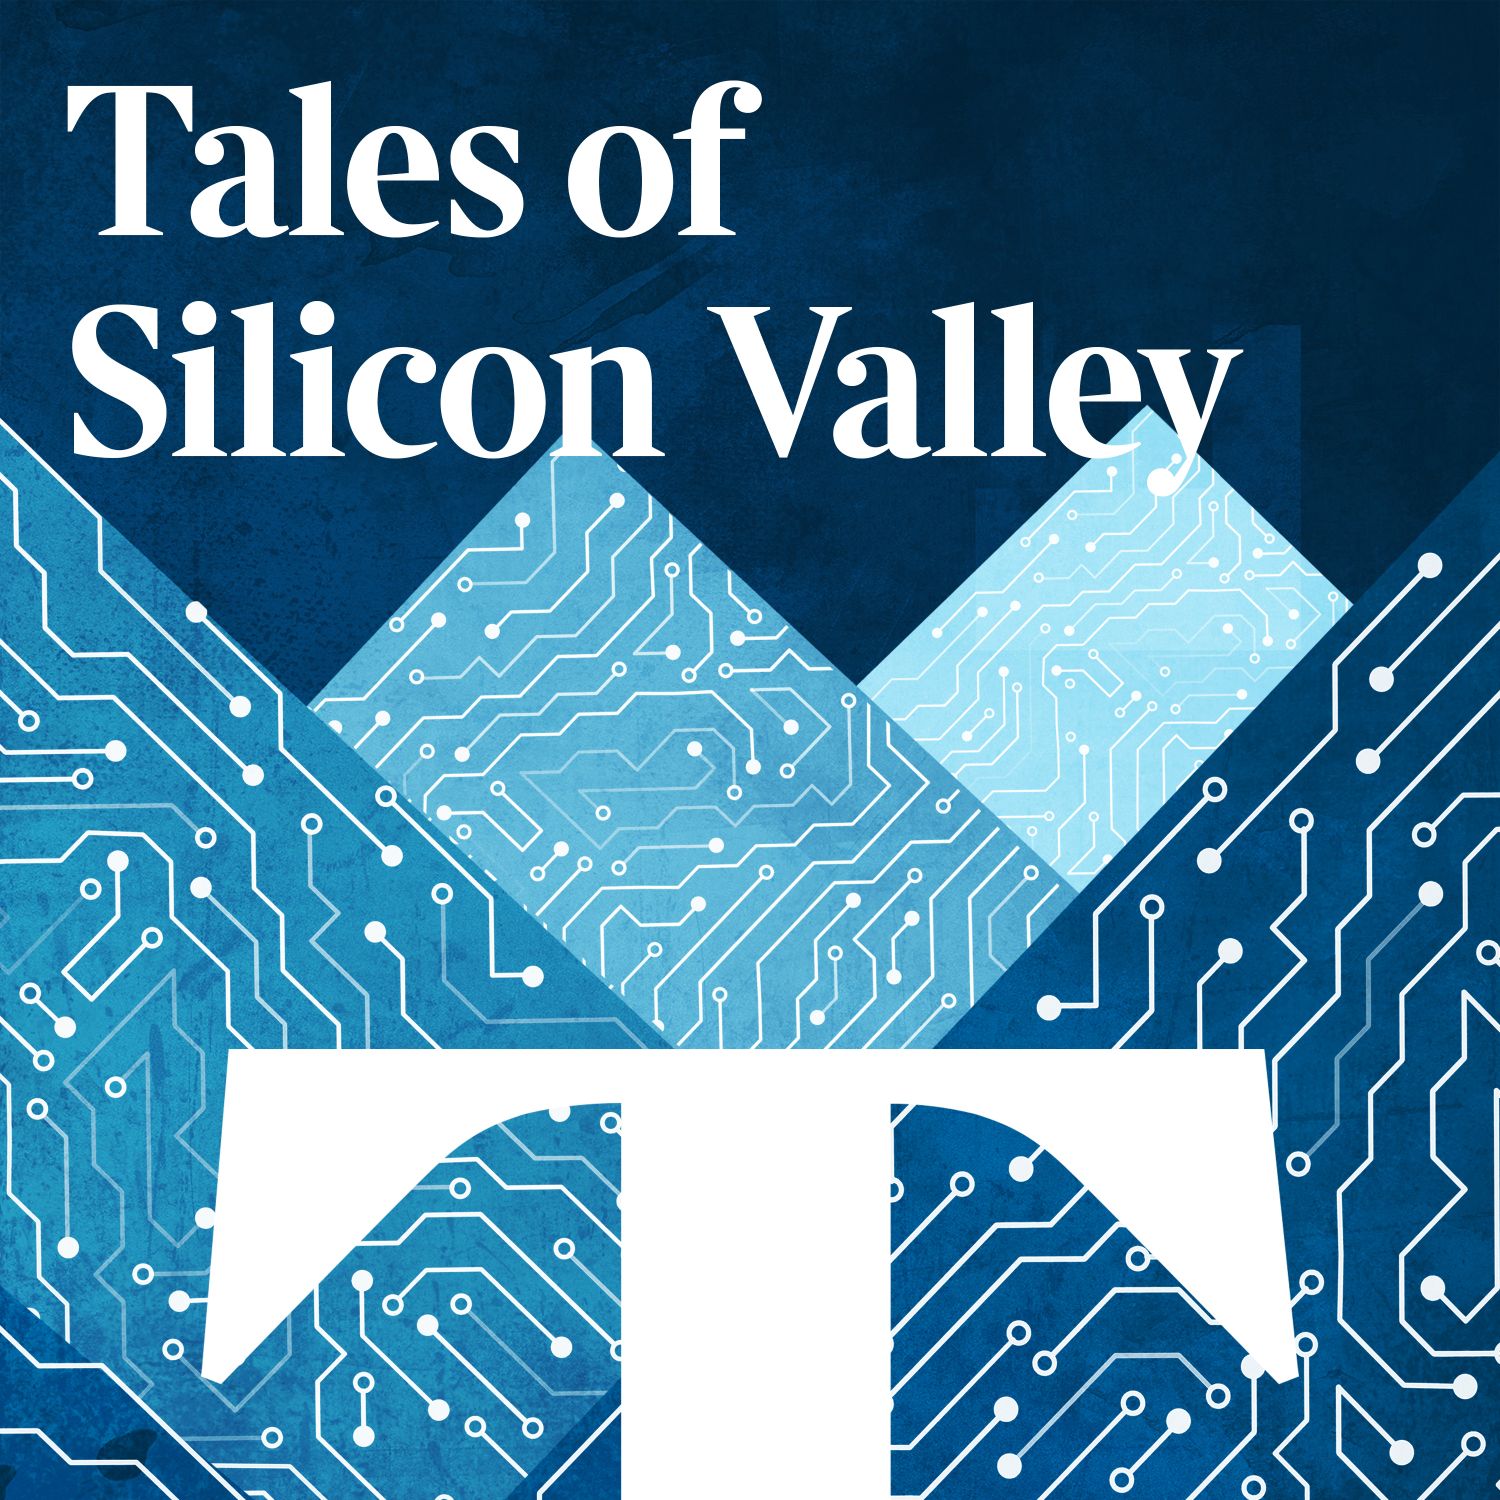 Tales of Silicon Valley